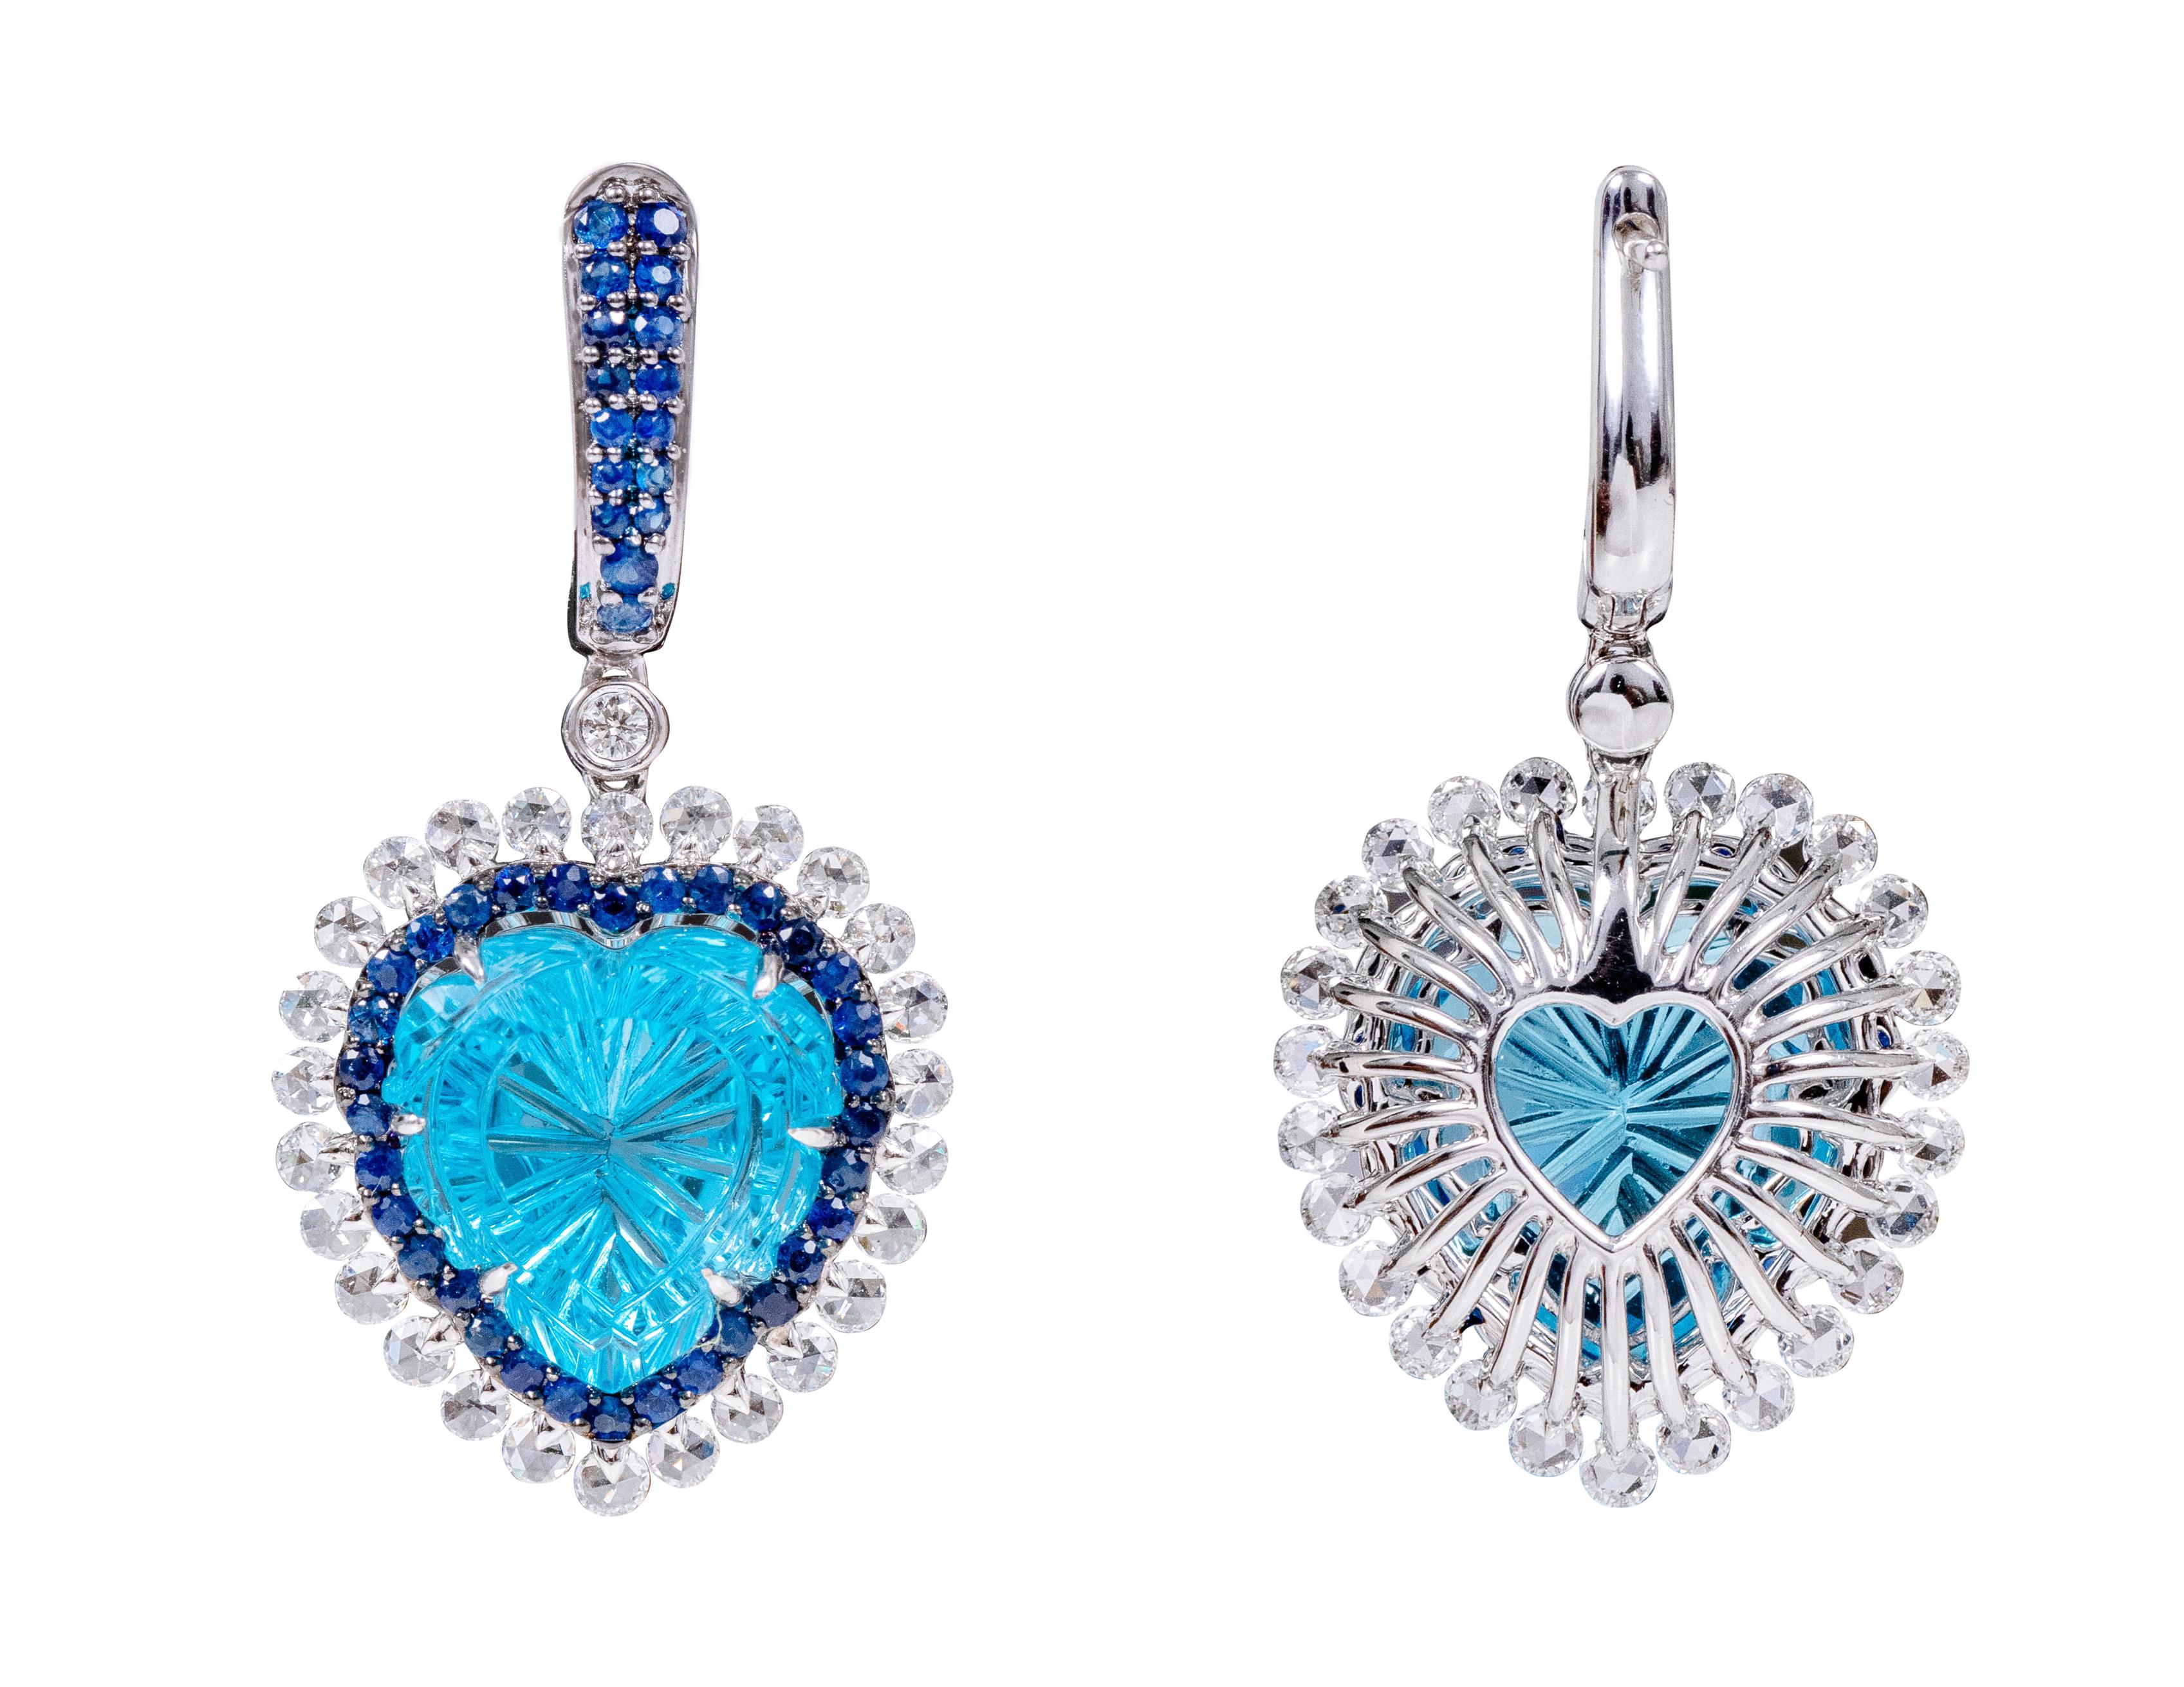 18 Karat Gold 23.67 Carat Diamond, Blue-Topaz, and Sapphire Heart-Shape Drop Cocktail Earrings

This impeccable swiss blue topaz, royal blue sapphire and diamond rose-cut earring is sensational. The earring sets itself apart with the exquisite